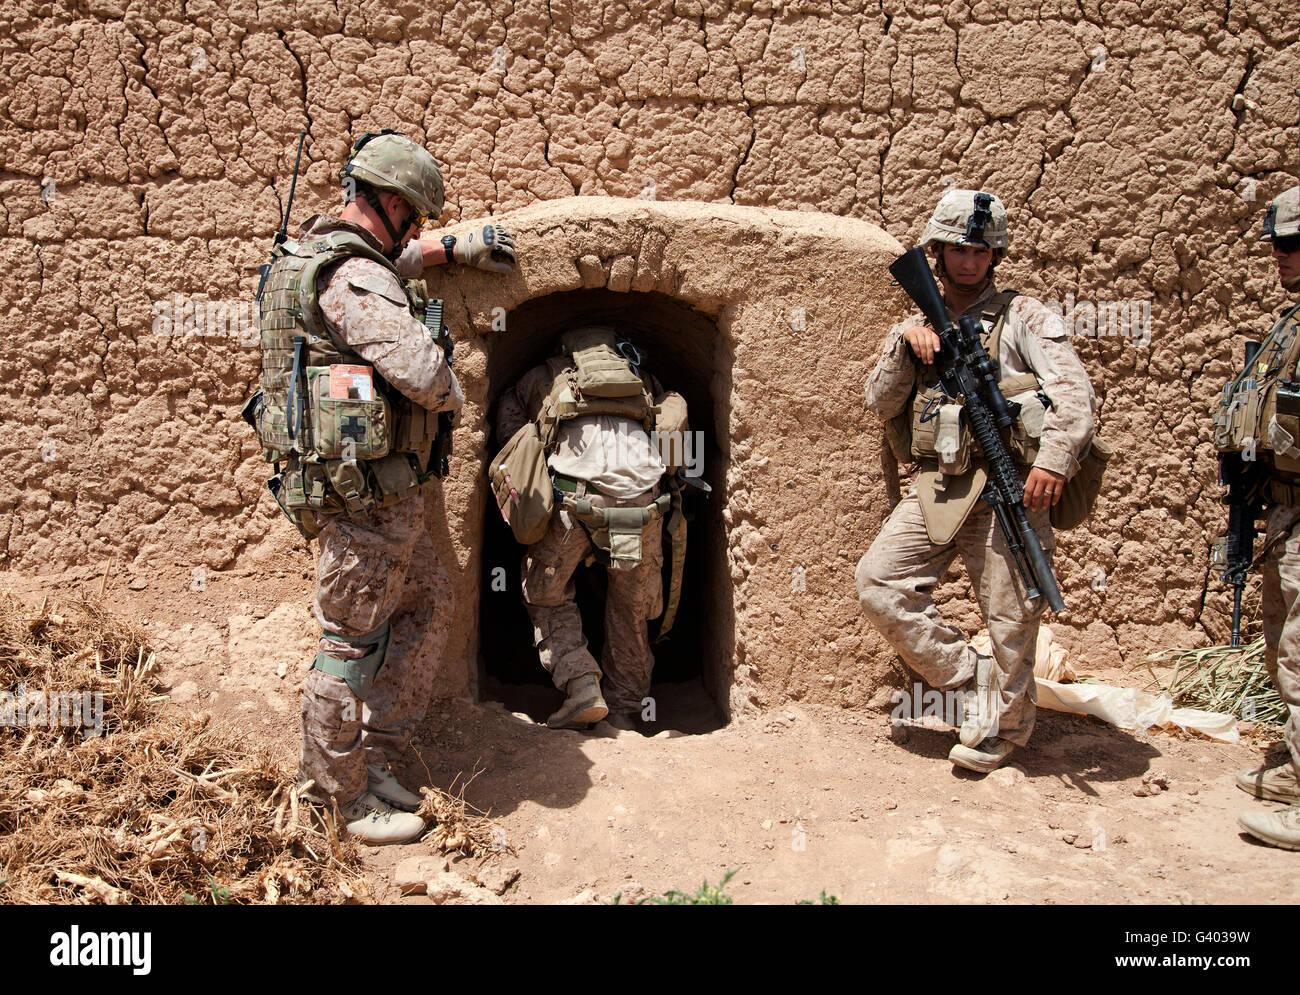 U.S. Marines search a compound in Afghanistan. Stock Photo